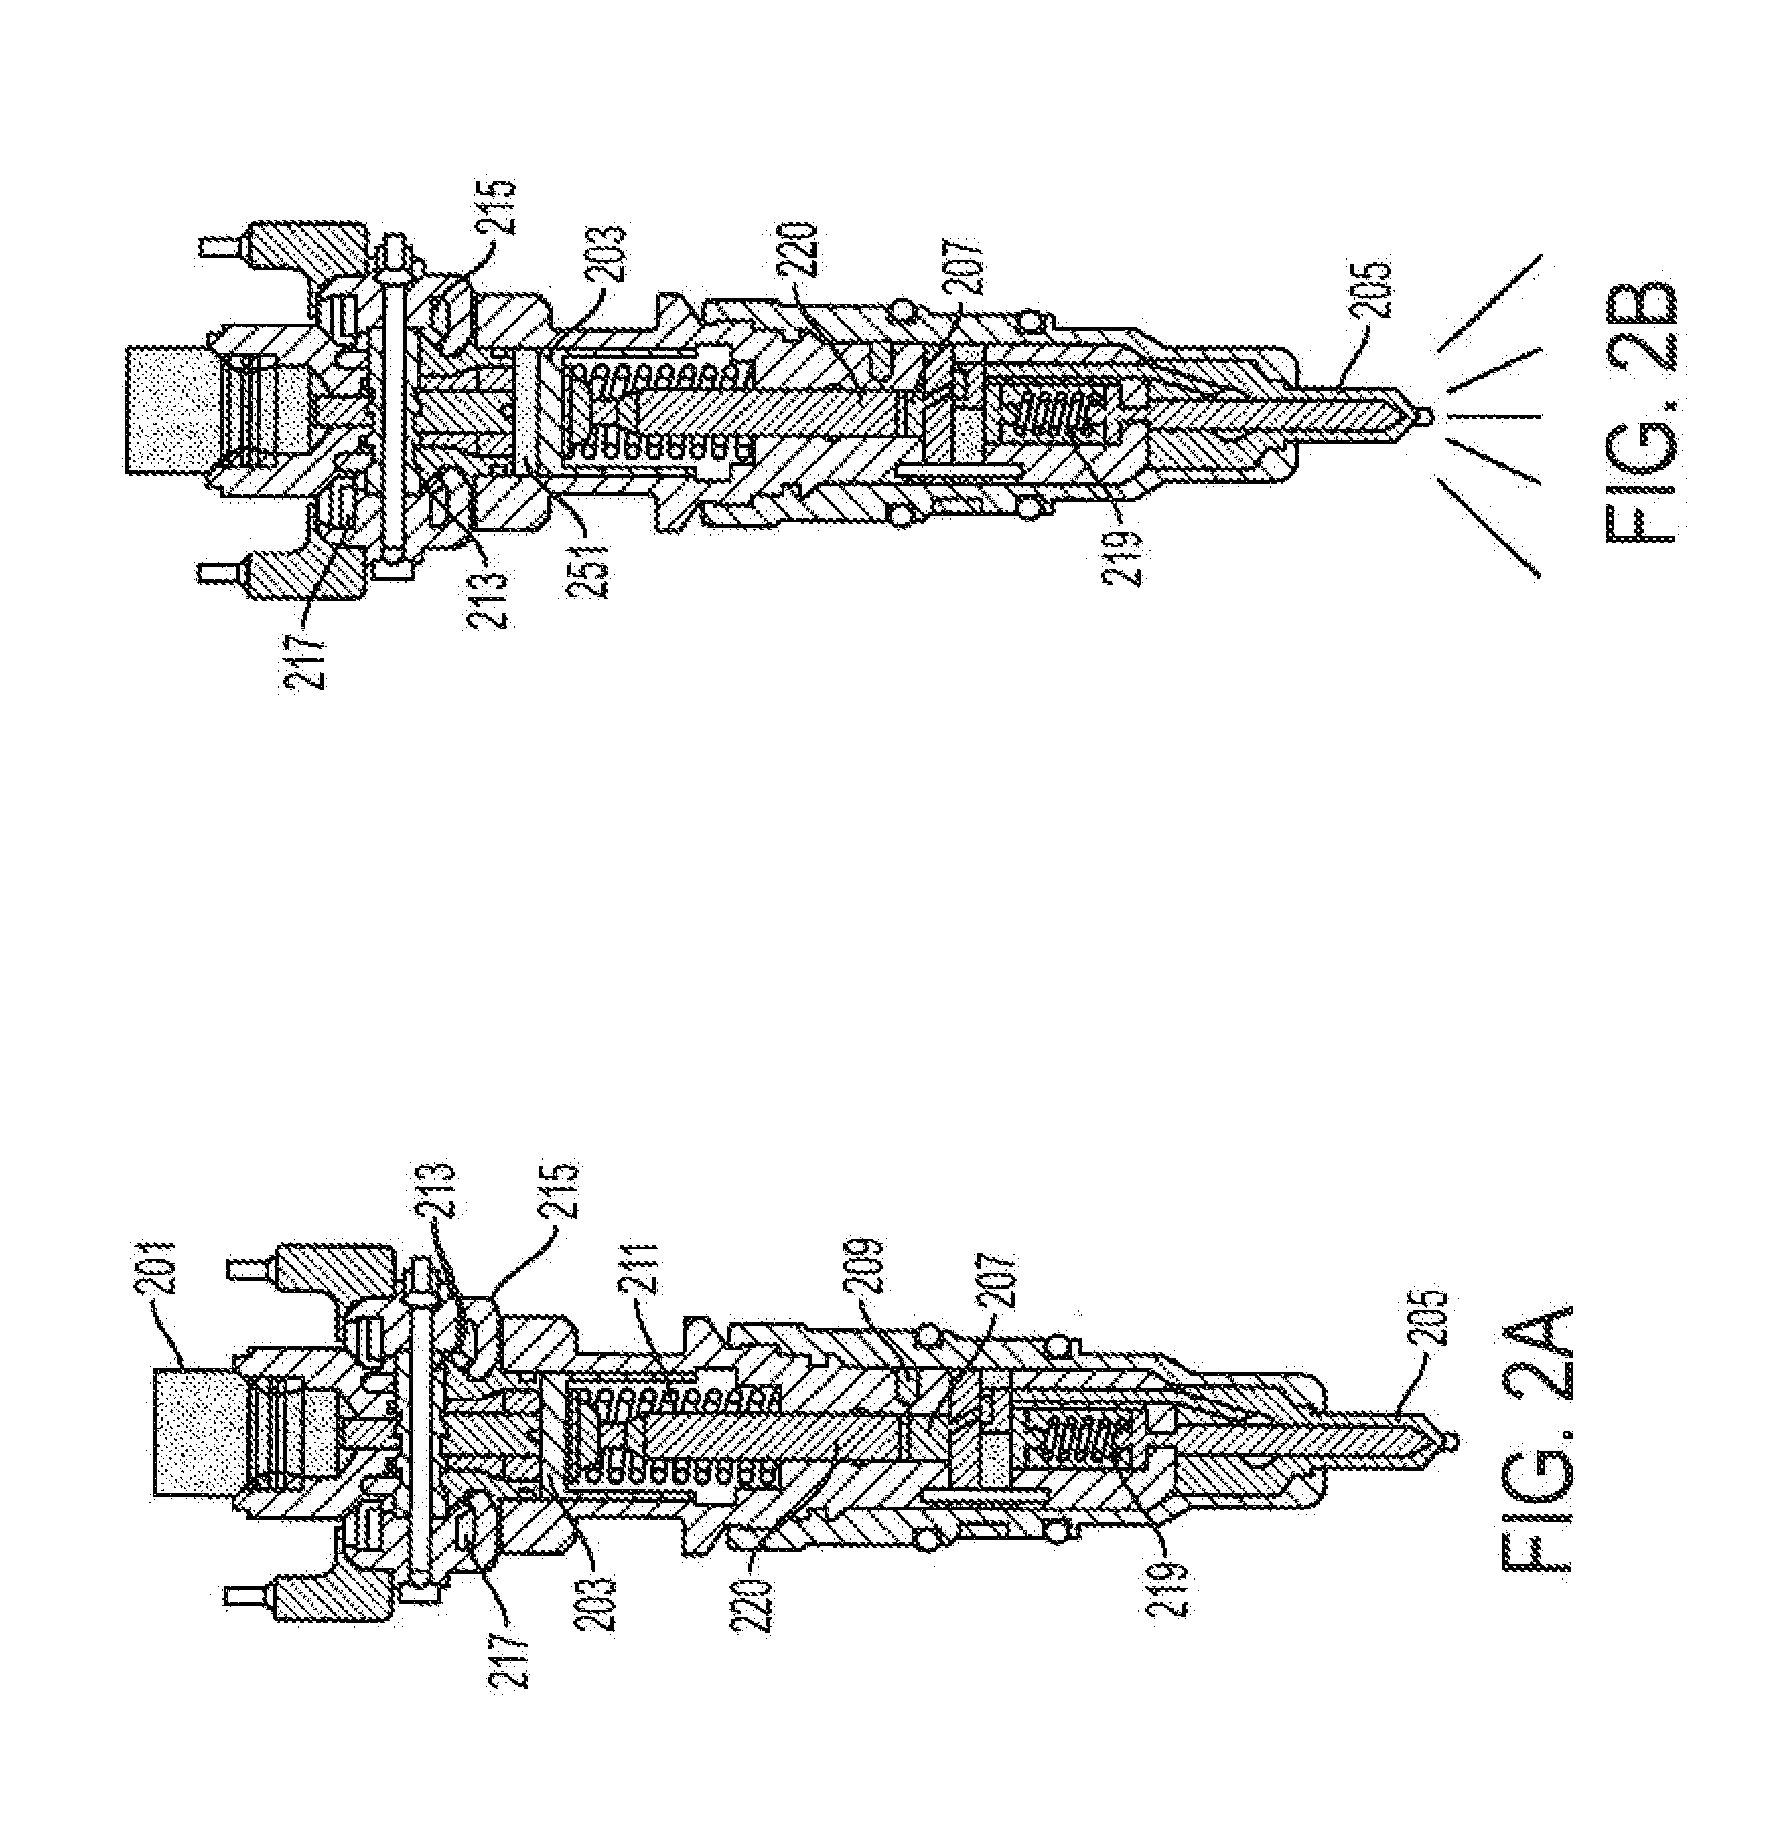 System and method for reducing power consumption when heating a fuel injector